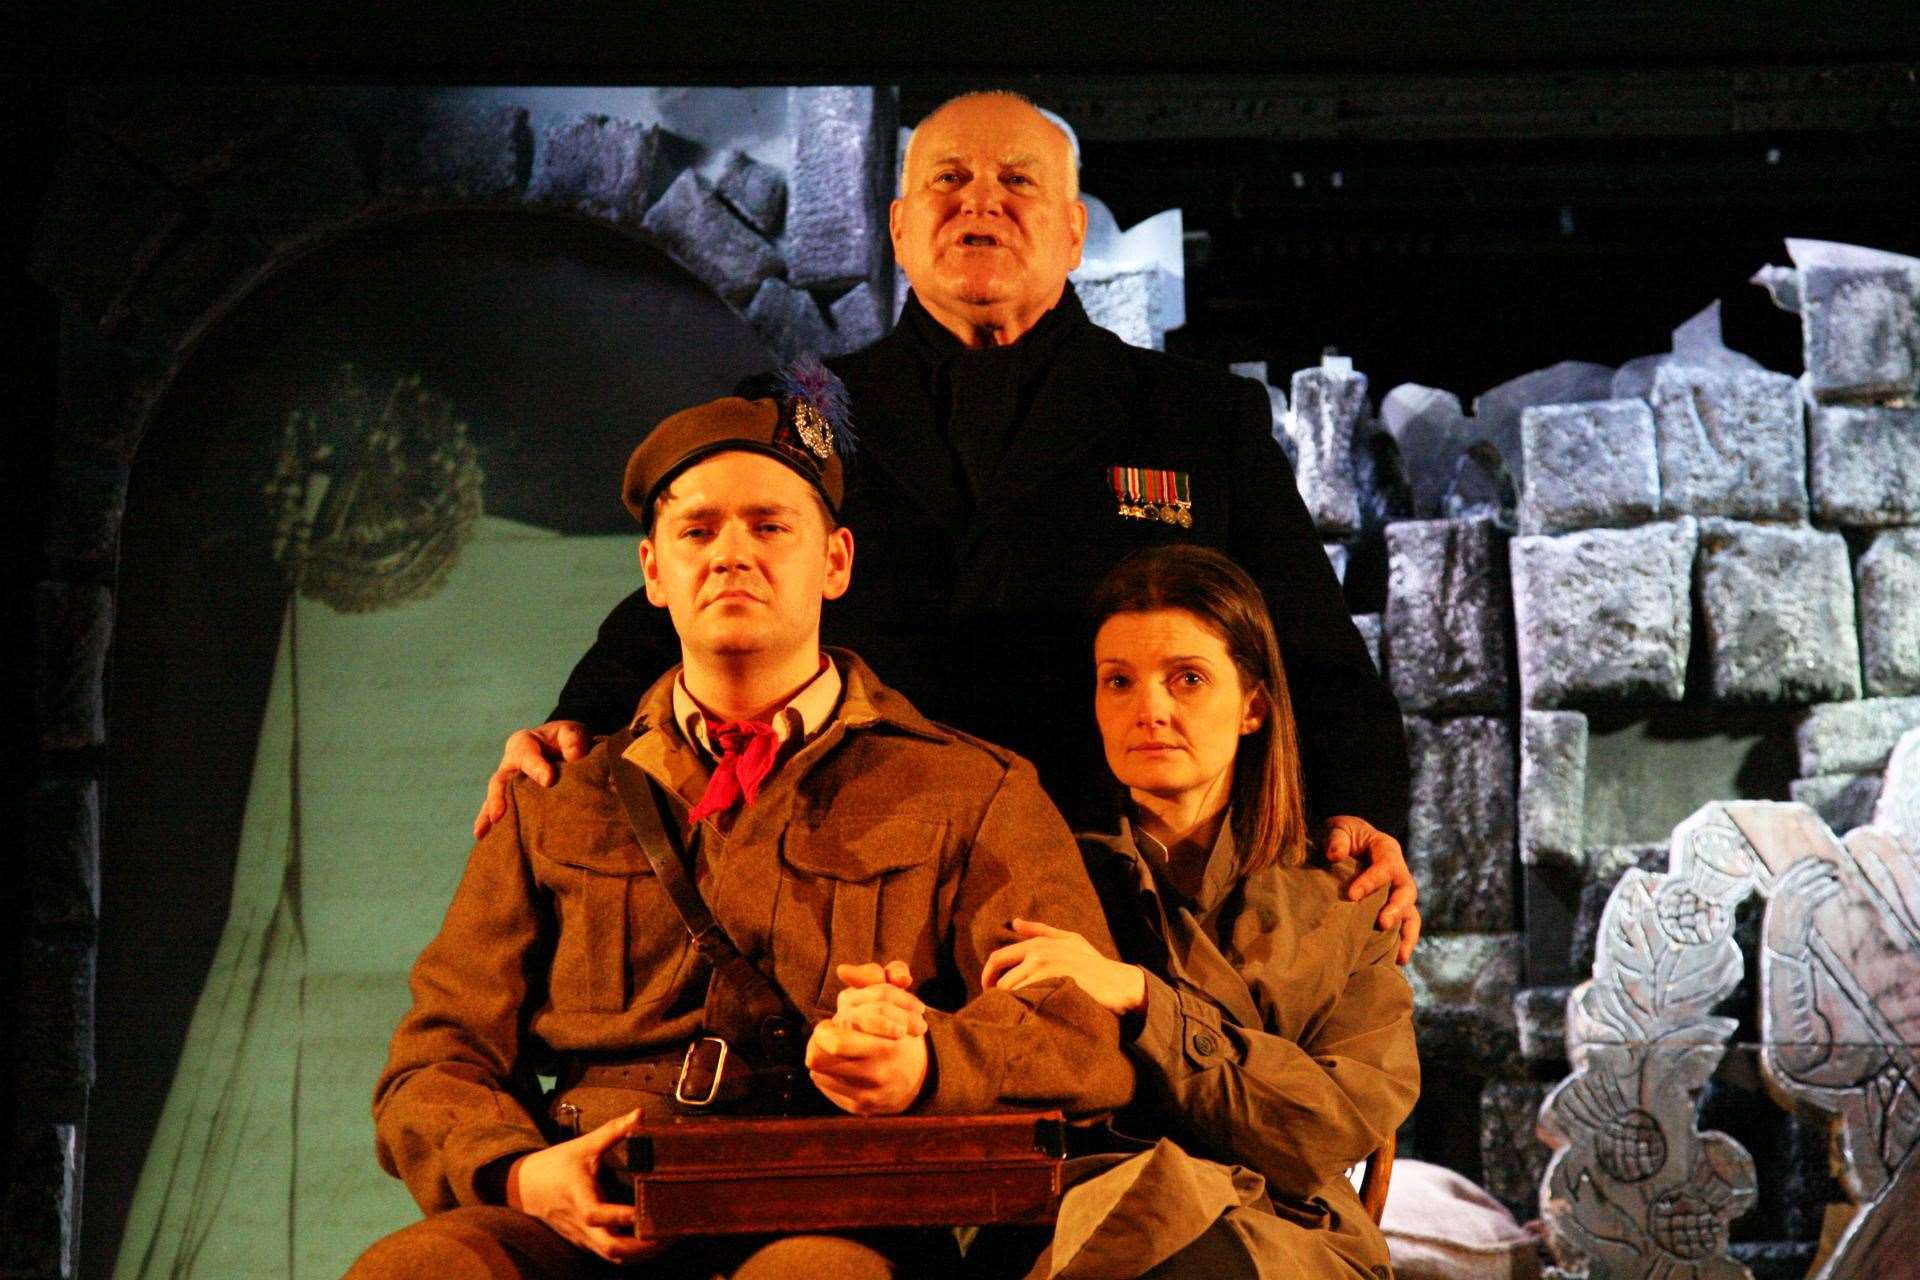 The play The Beaches of St Valéry, by Dr Stuart Hepburn, has been made available free as part of the 80th anniversary commemorations of St Valéry this week. Picture: Leslie Black